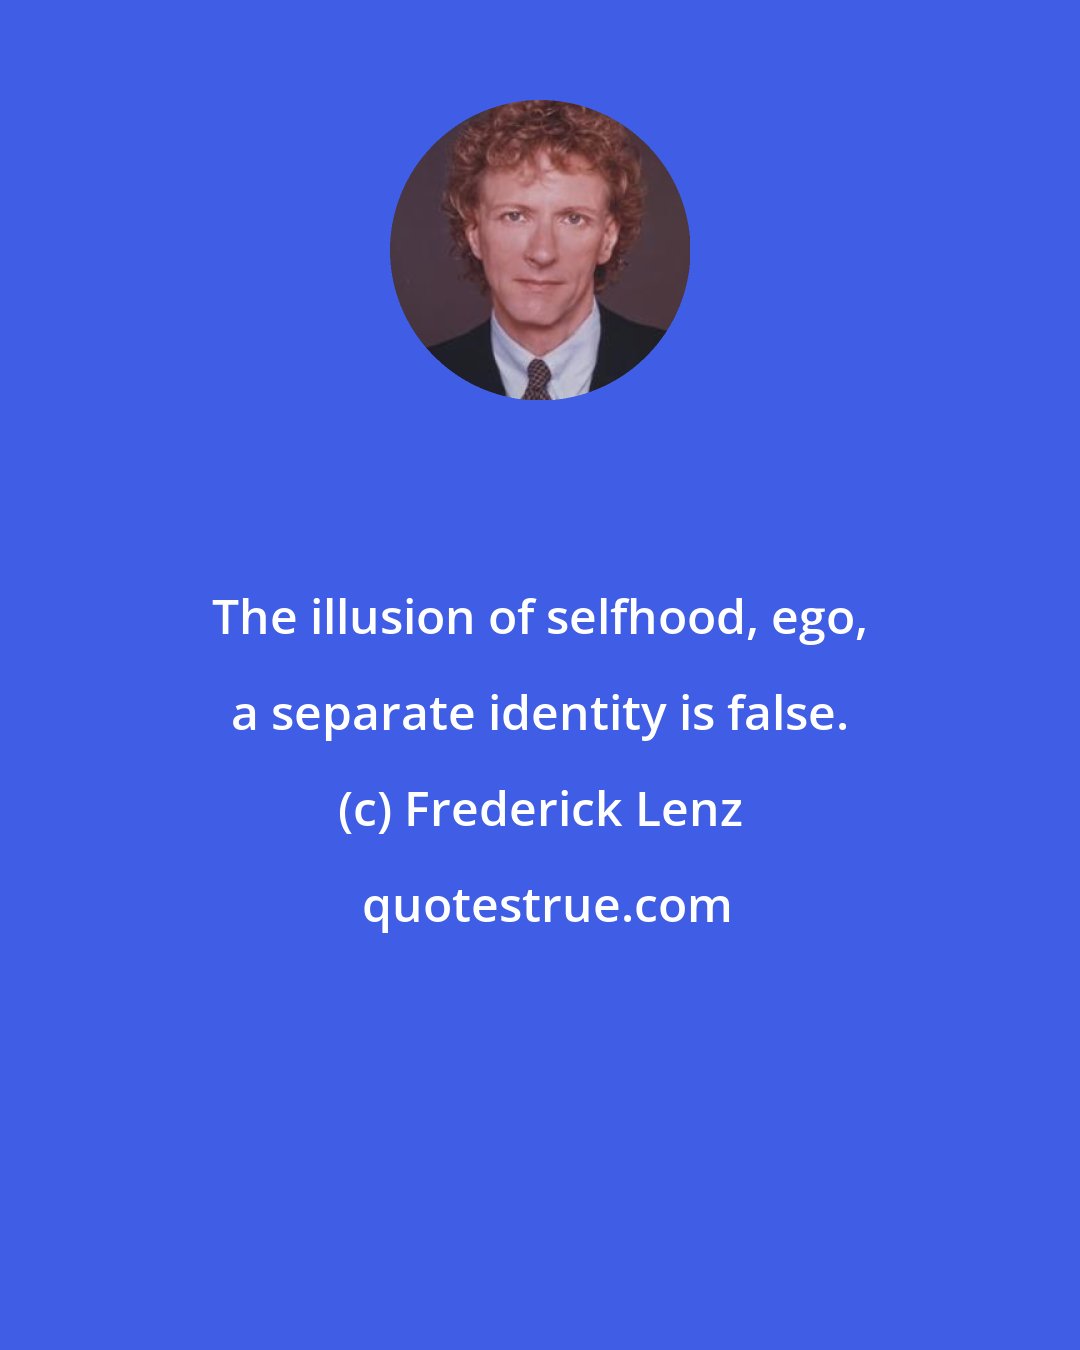 Frederick Lenz: The illusion of selfhood, ego, a separate identity is false.